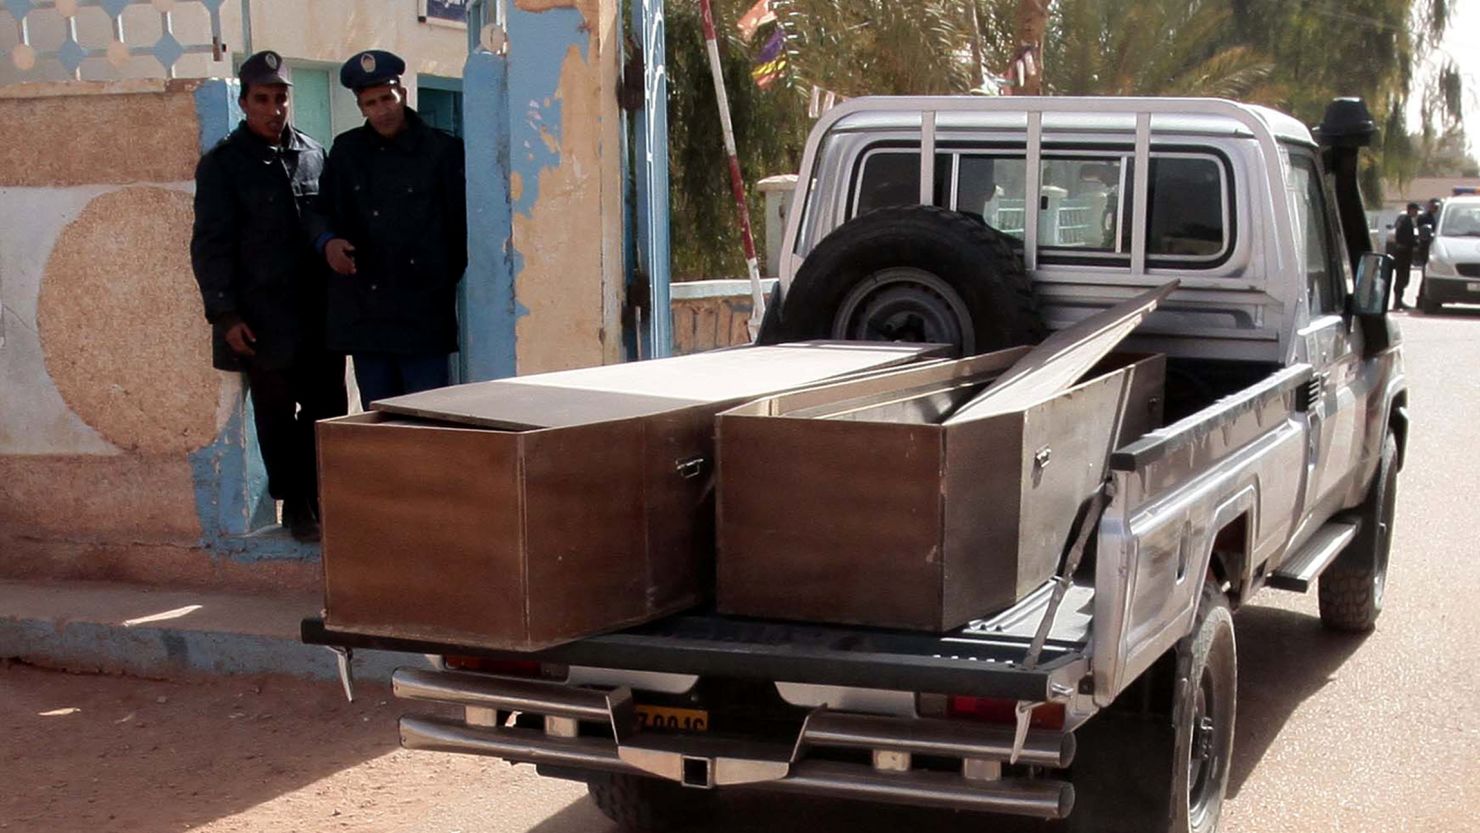 Empty coffins are transported to collect victims at desert gas plant in Algeria on January 21, 2012 in In Amenas.